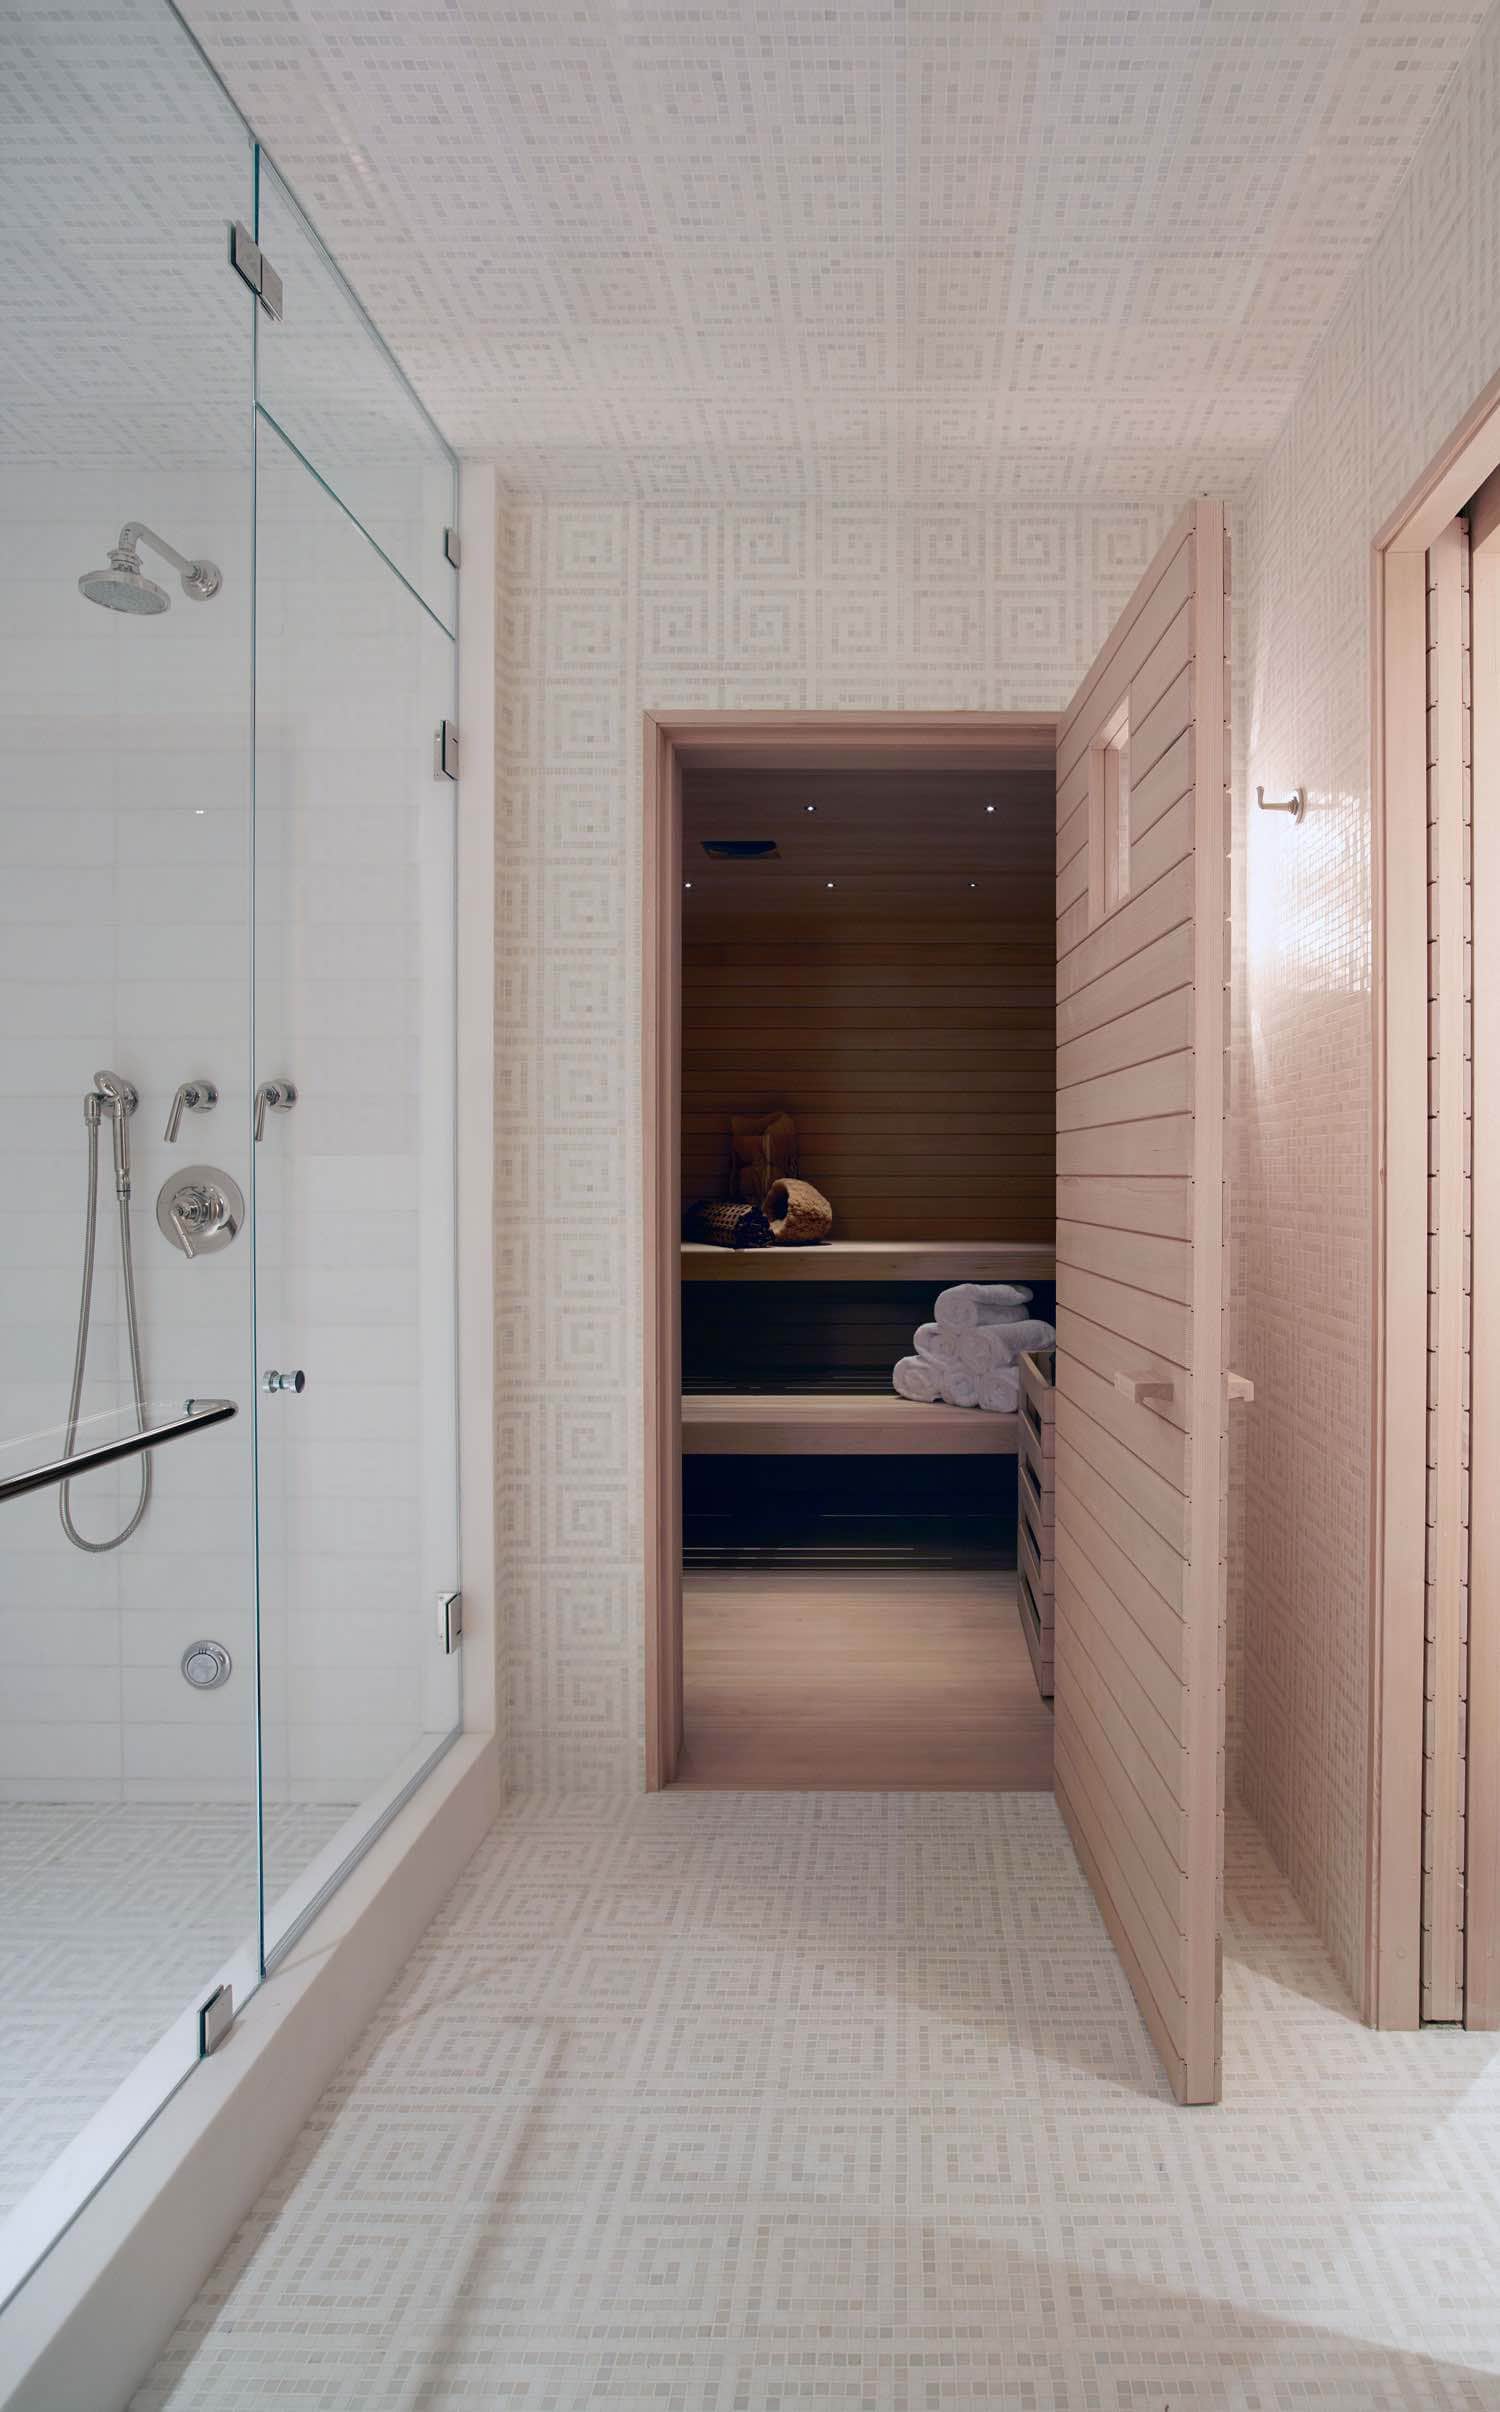 This image shows a sauna room designed by Carol Egan in mosaic Spartan Maze Field tile by Urban Archaeology.  The Sauna door is opened to the adjacent marble bathroom with plumbing fixtures from the Henry Collection supplied by Waterworks.